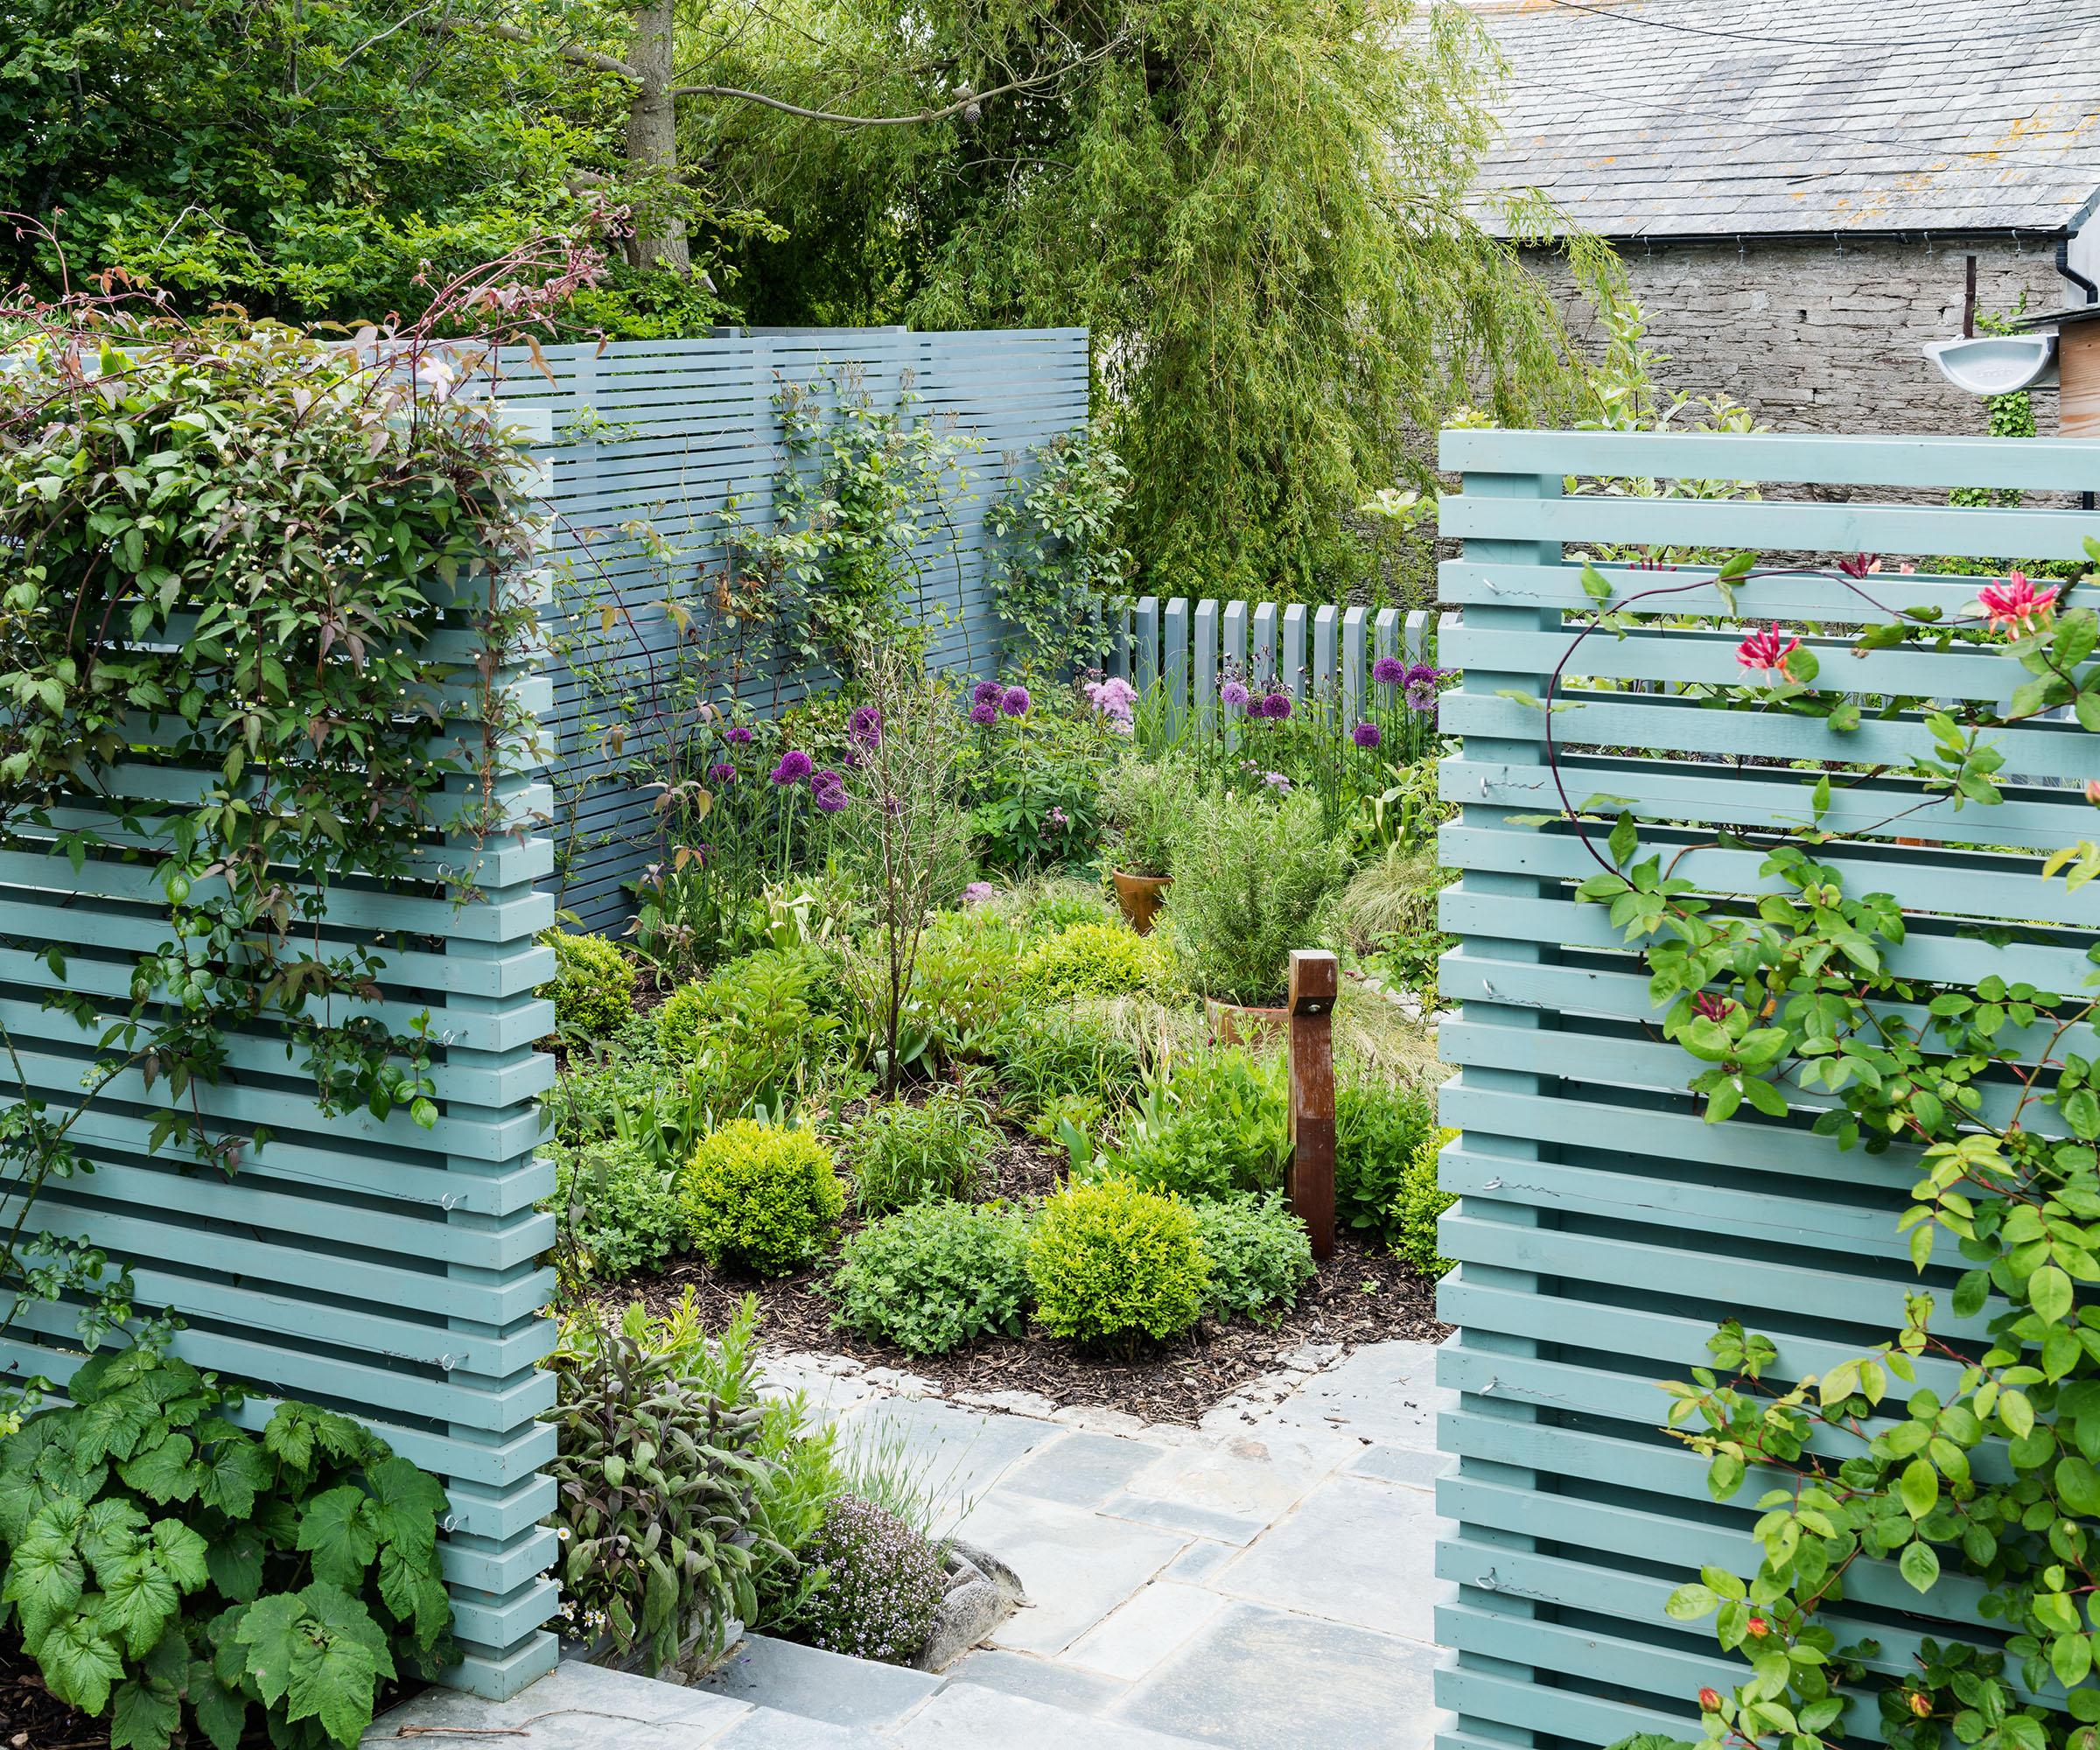 Courtyard garden with wooden slat screen painted in Pigeon from Farrow & Ball